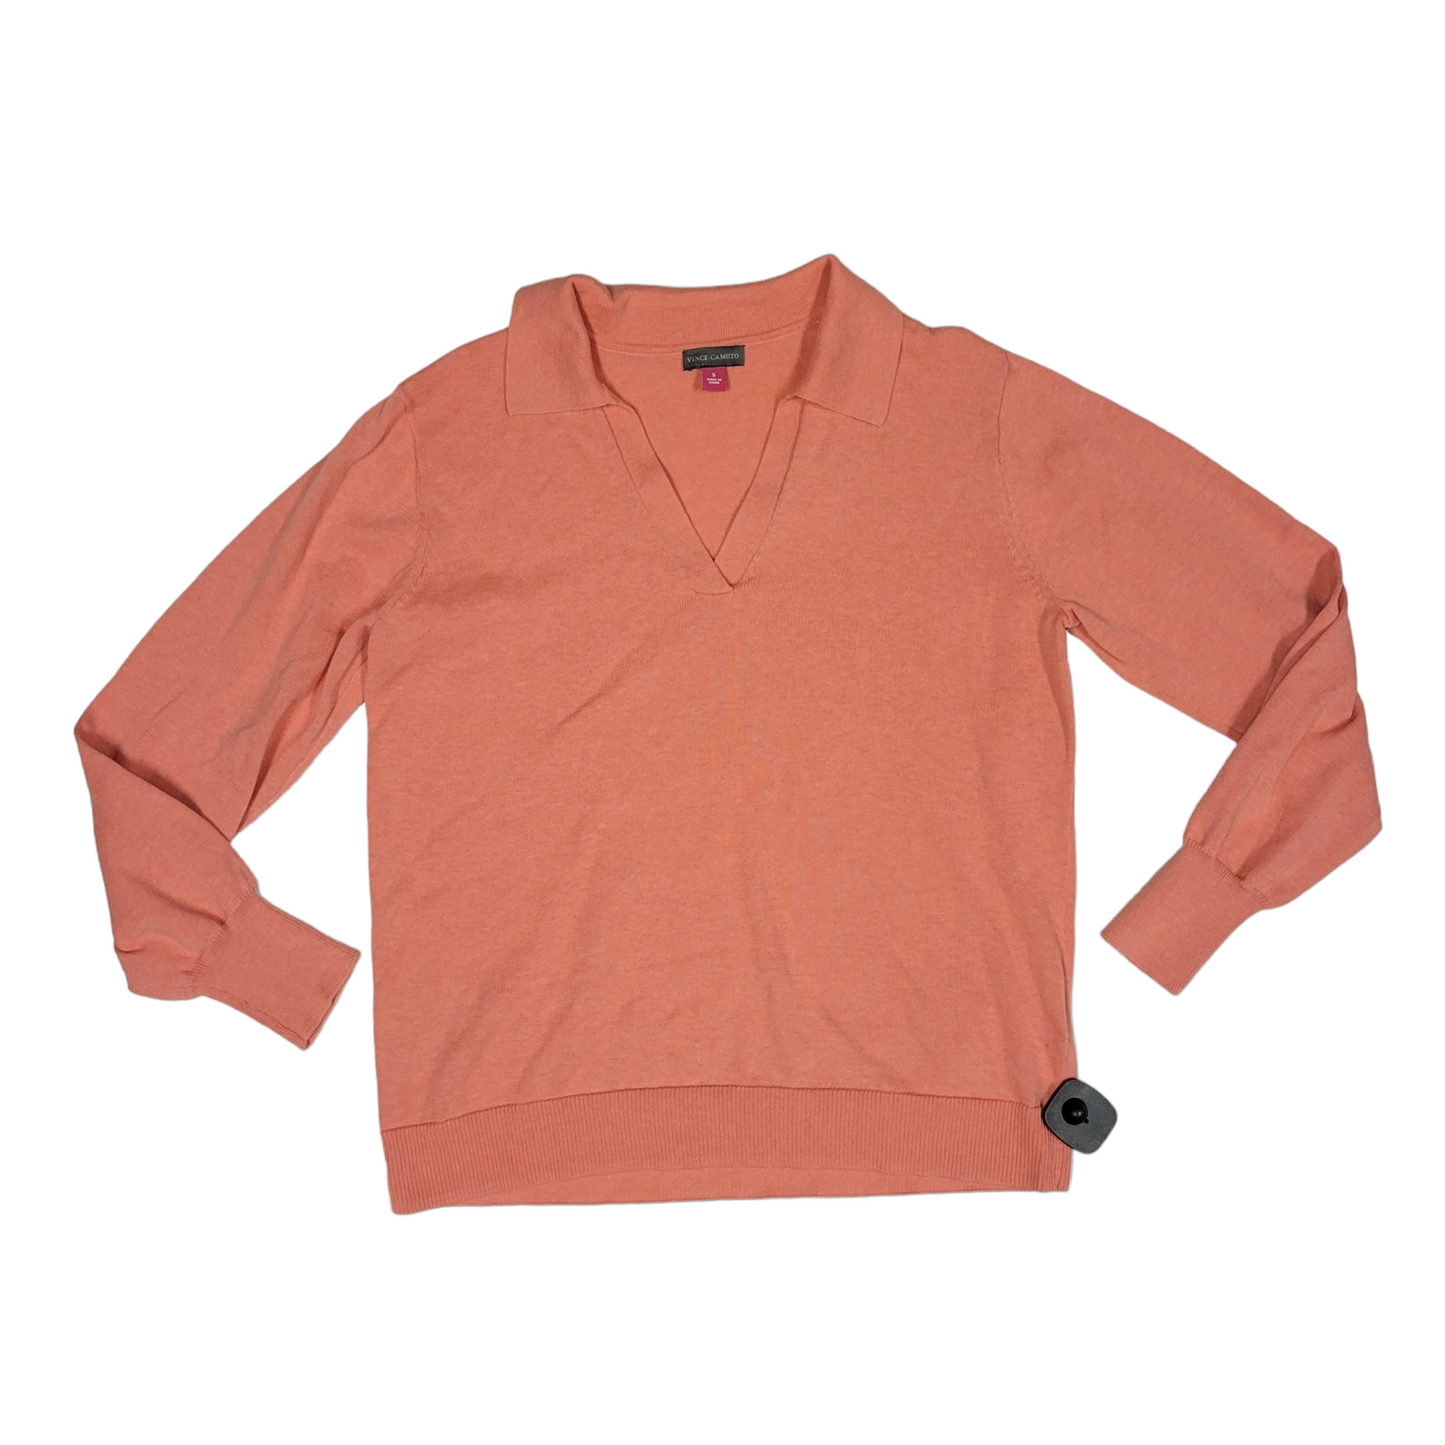 Sweater By Vince Camuto  Size: S